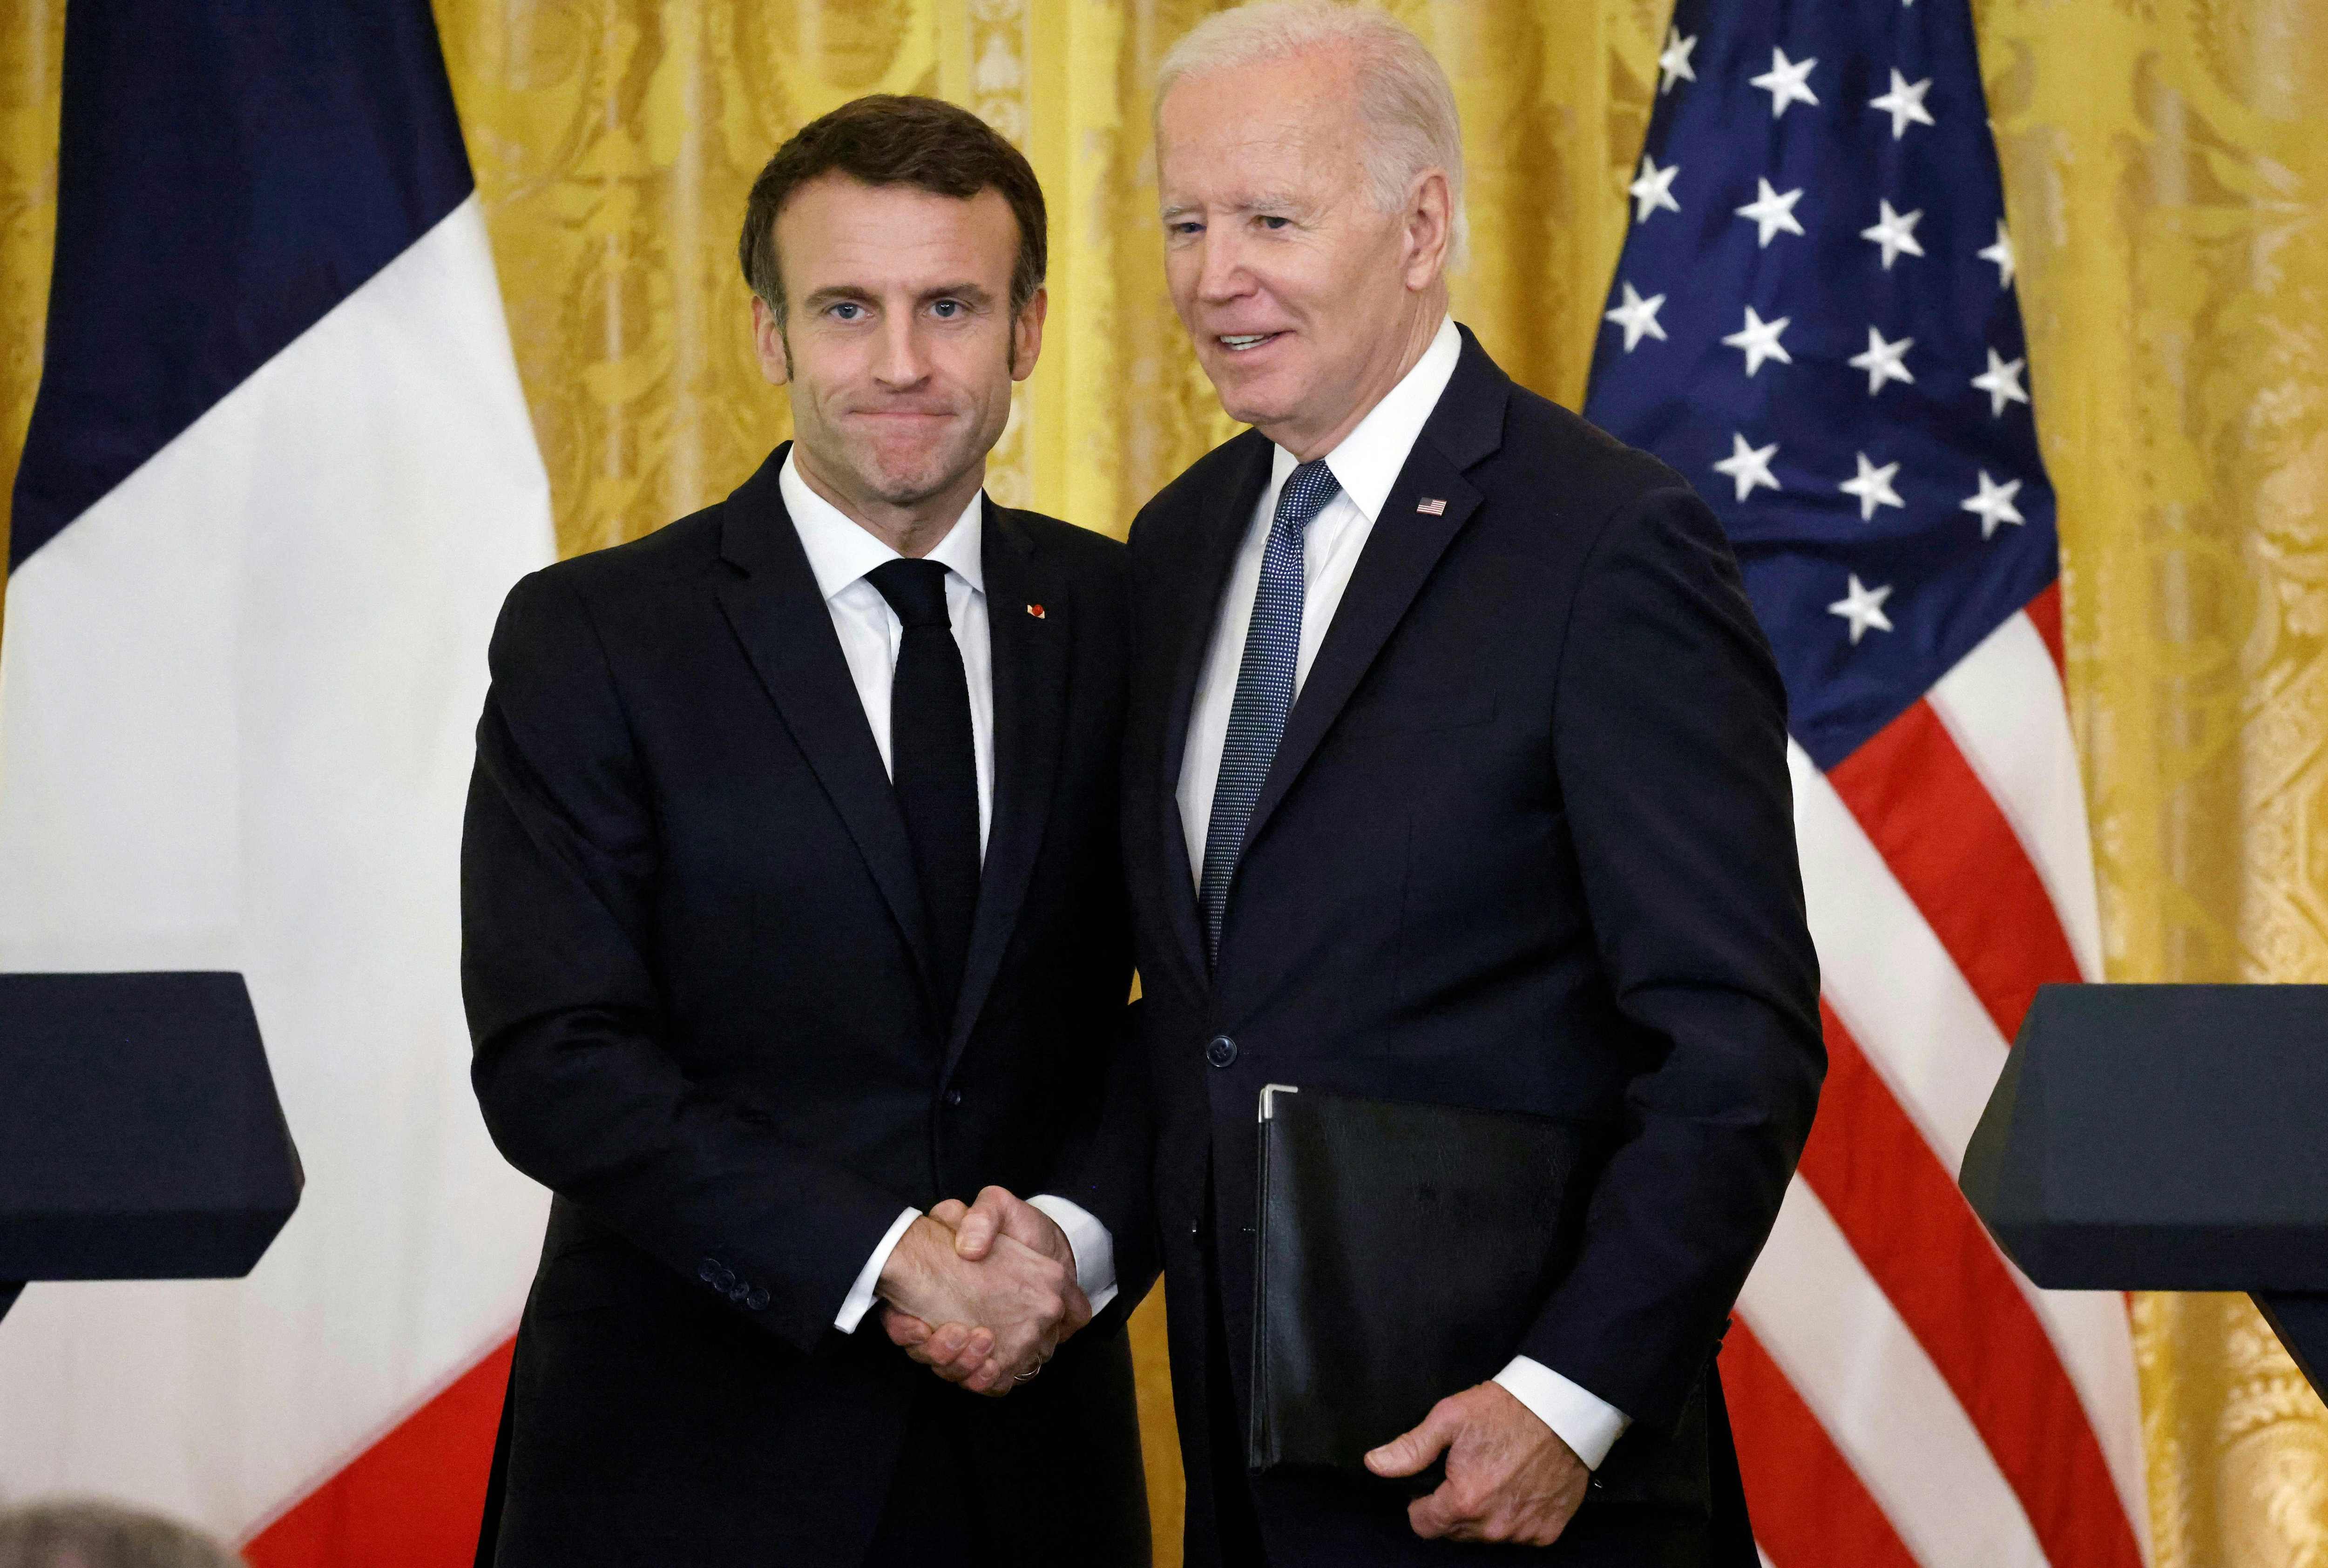 Biden Admits ‘Glitches’ in Inflation Reduction Act After Meeting With French President Macron